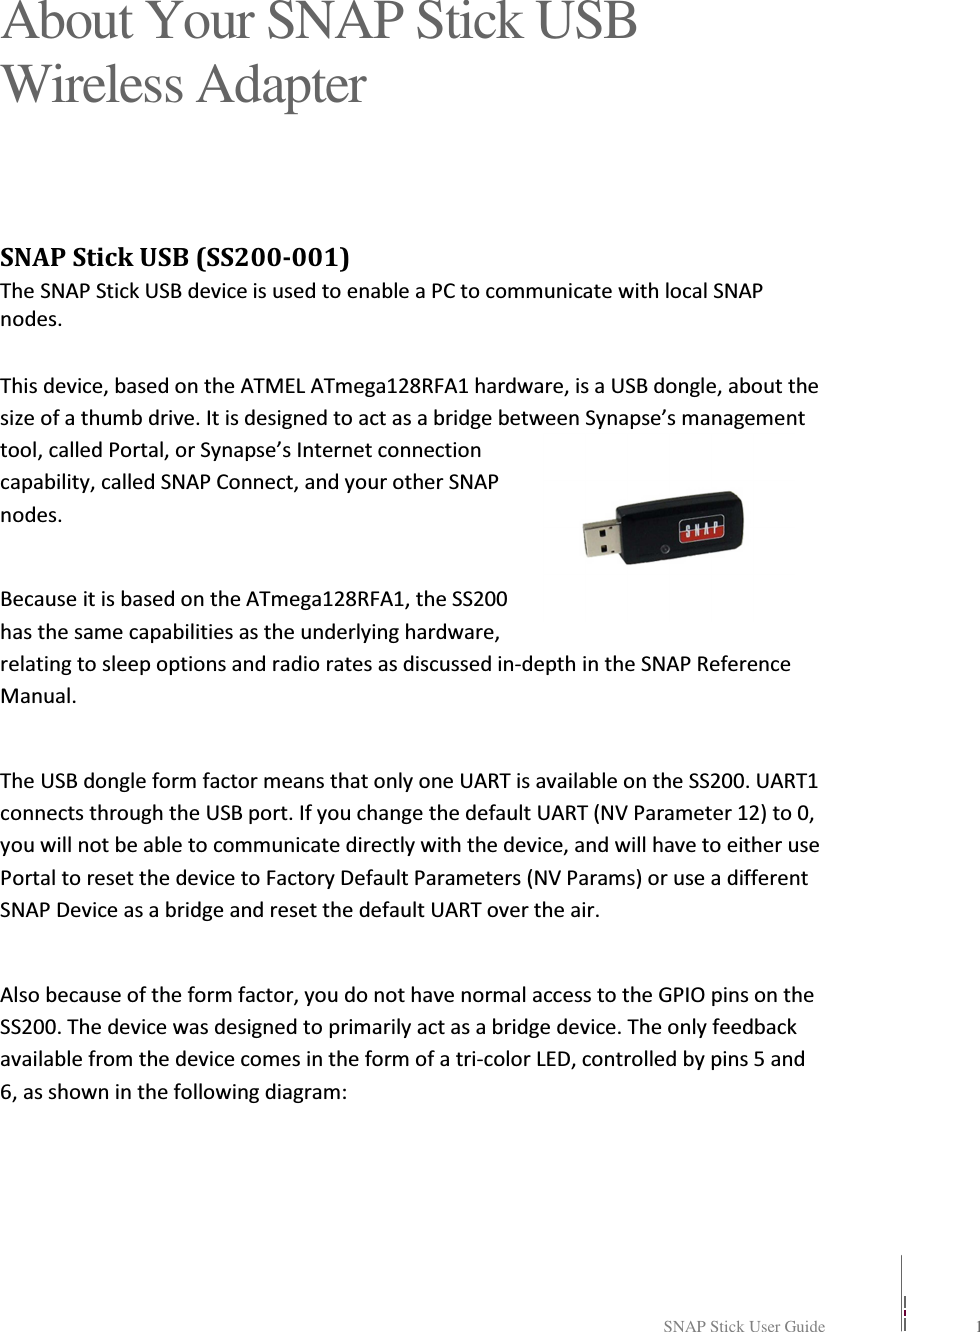   SNAP Stick User Guide    1    About Your SNAP Stick USB Wireless Adapter SNAP Stick USB (SS200-001) The SNAP Stick USB device is used to enable a PC to communicate with local SNAP nodes.  This device, based on the ATMEL ATmega128RFA1 hardware, is a USB dongle, about the size of a thumb drive. It is designed to act as a bridge between Synapse’s management tool, called Portal, or Synapse’s Internet connection capability, called SNAP Connect, and your other SNAP nodes.  Because it is based on the ATmega128RFA1, the SS200 has the same capabilities as the underlying hardware, relating to sleep options and radio rates as discussed in-depth in the SNAP Reference Manual.  The USB dongle form factor means that only one UART is available on the SS200. UART1 connects through the USB port. If you change the default UART (NV Parameter 12) to 0, you will not be able to communicate directly with the device, and will have to either use Portal to reset the device to Factory Default Parameters (NV Params) or use a different SNAP Device as a bridge and reset the default UART over the air.  Also because of the form factor, you do not have normal access to the GPIO pins on the SS200. The device was designed to primarily act as a bridge device. The only feedback available from the device comes in the form of a tri-color LED, controlled by pins 5 and 6, as shown in the following diagram:   